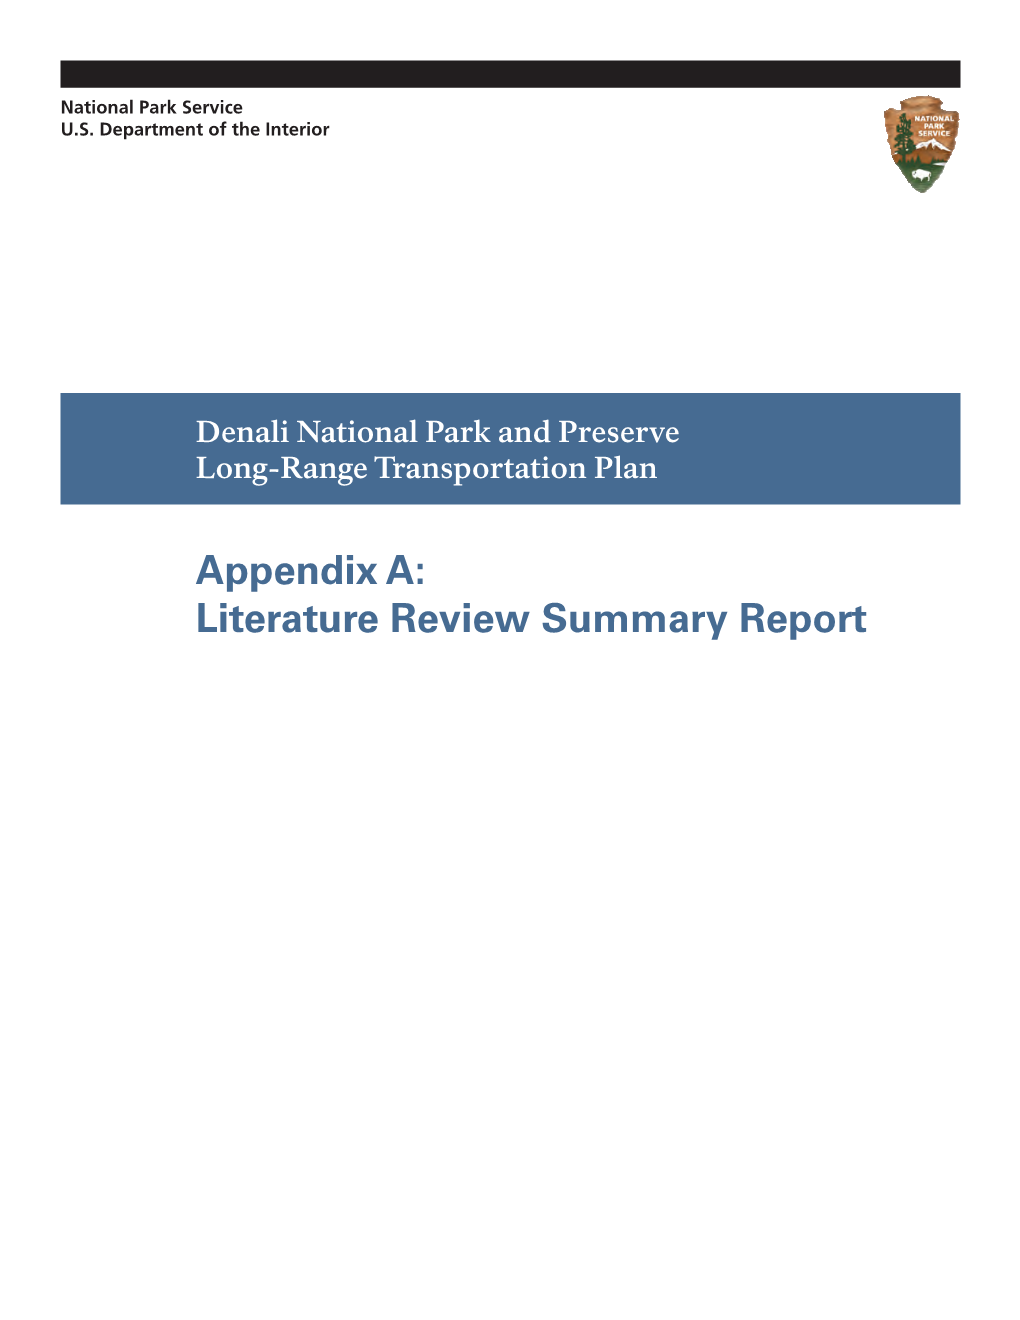 Appendix A: Literature Review Summary Report Denali National Park and Preserve Existing Conditions Report Long Range Transportation Plan February 27, 2015